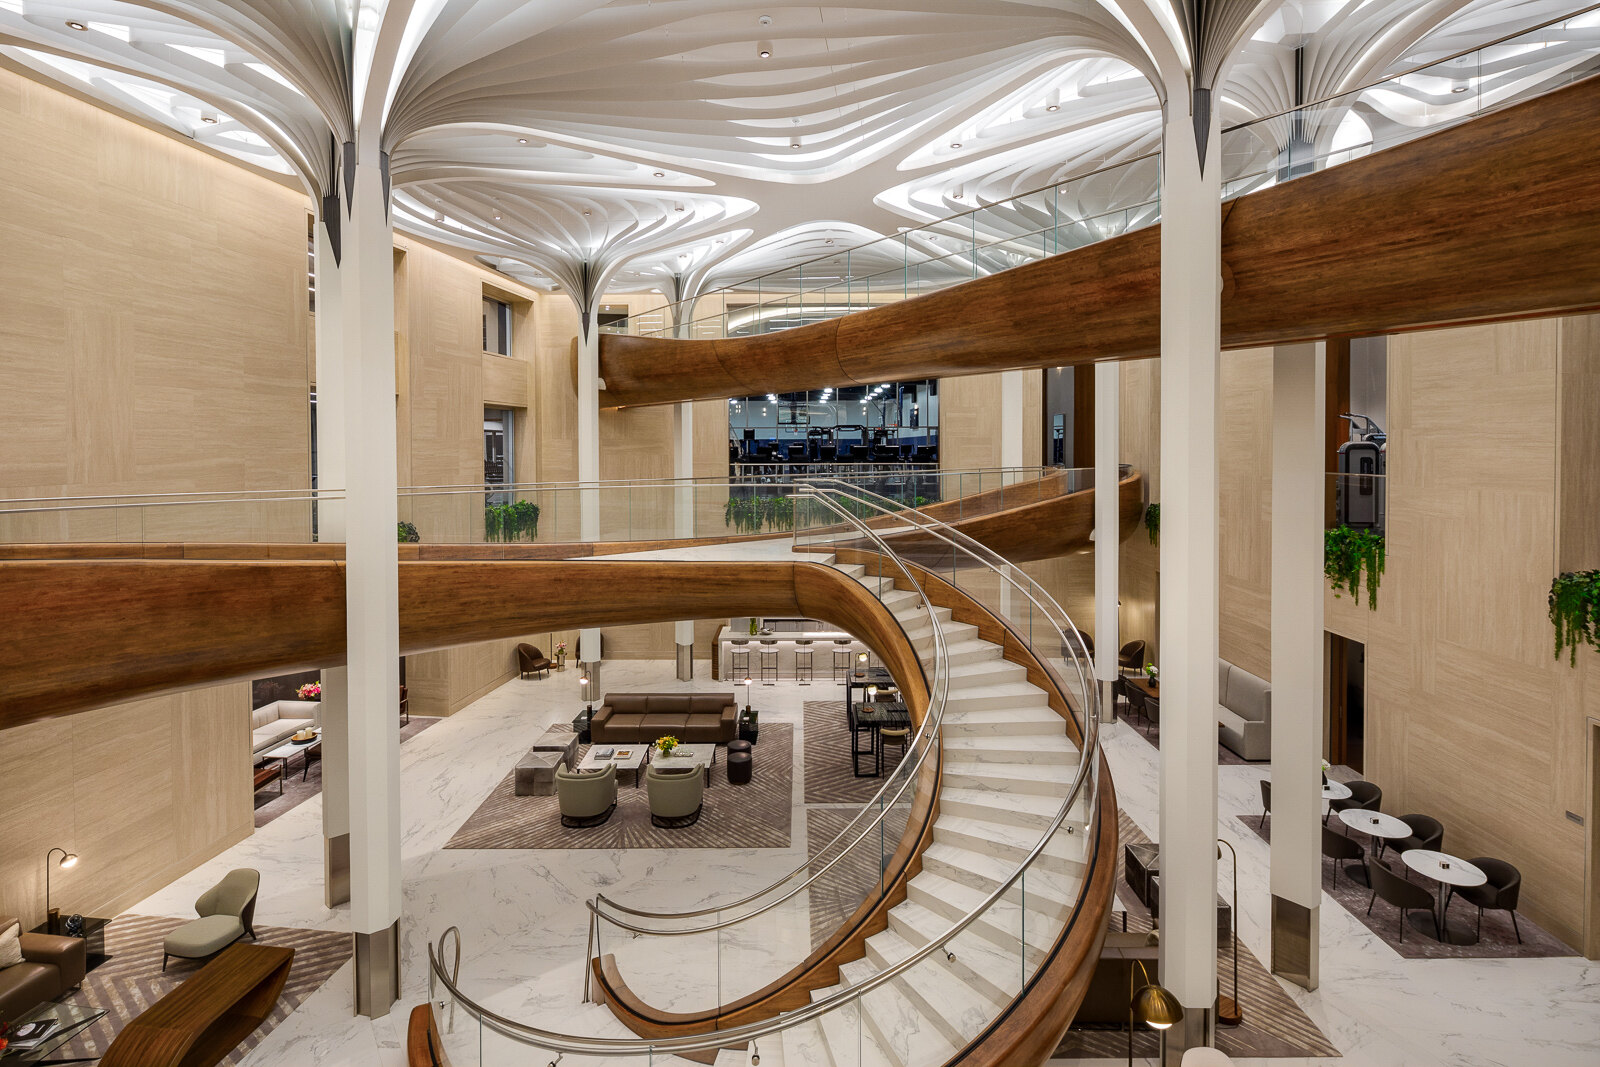 Modern hotel lobby with elegant curved staircase and striking organic design elements, showcasing a blend of natural wood accents and sleek white contours.